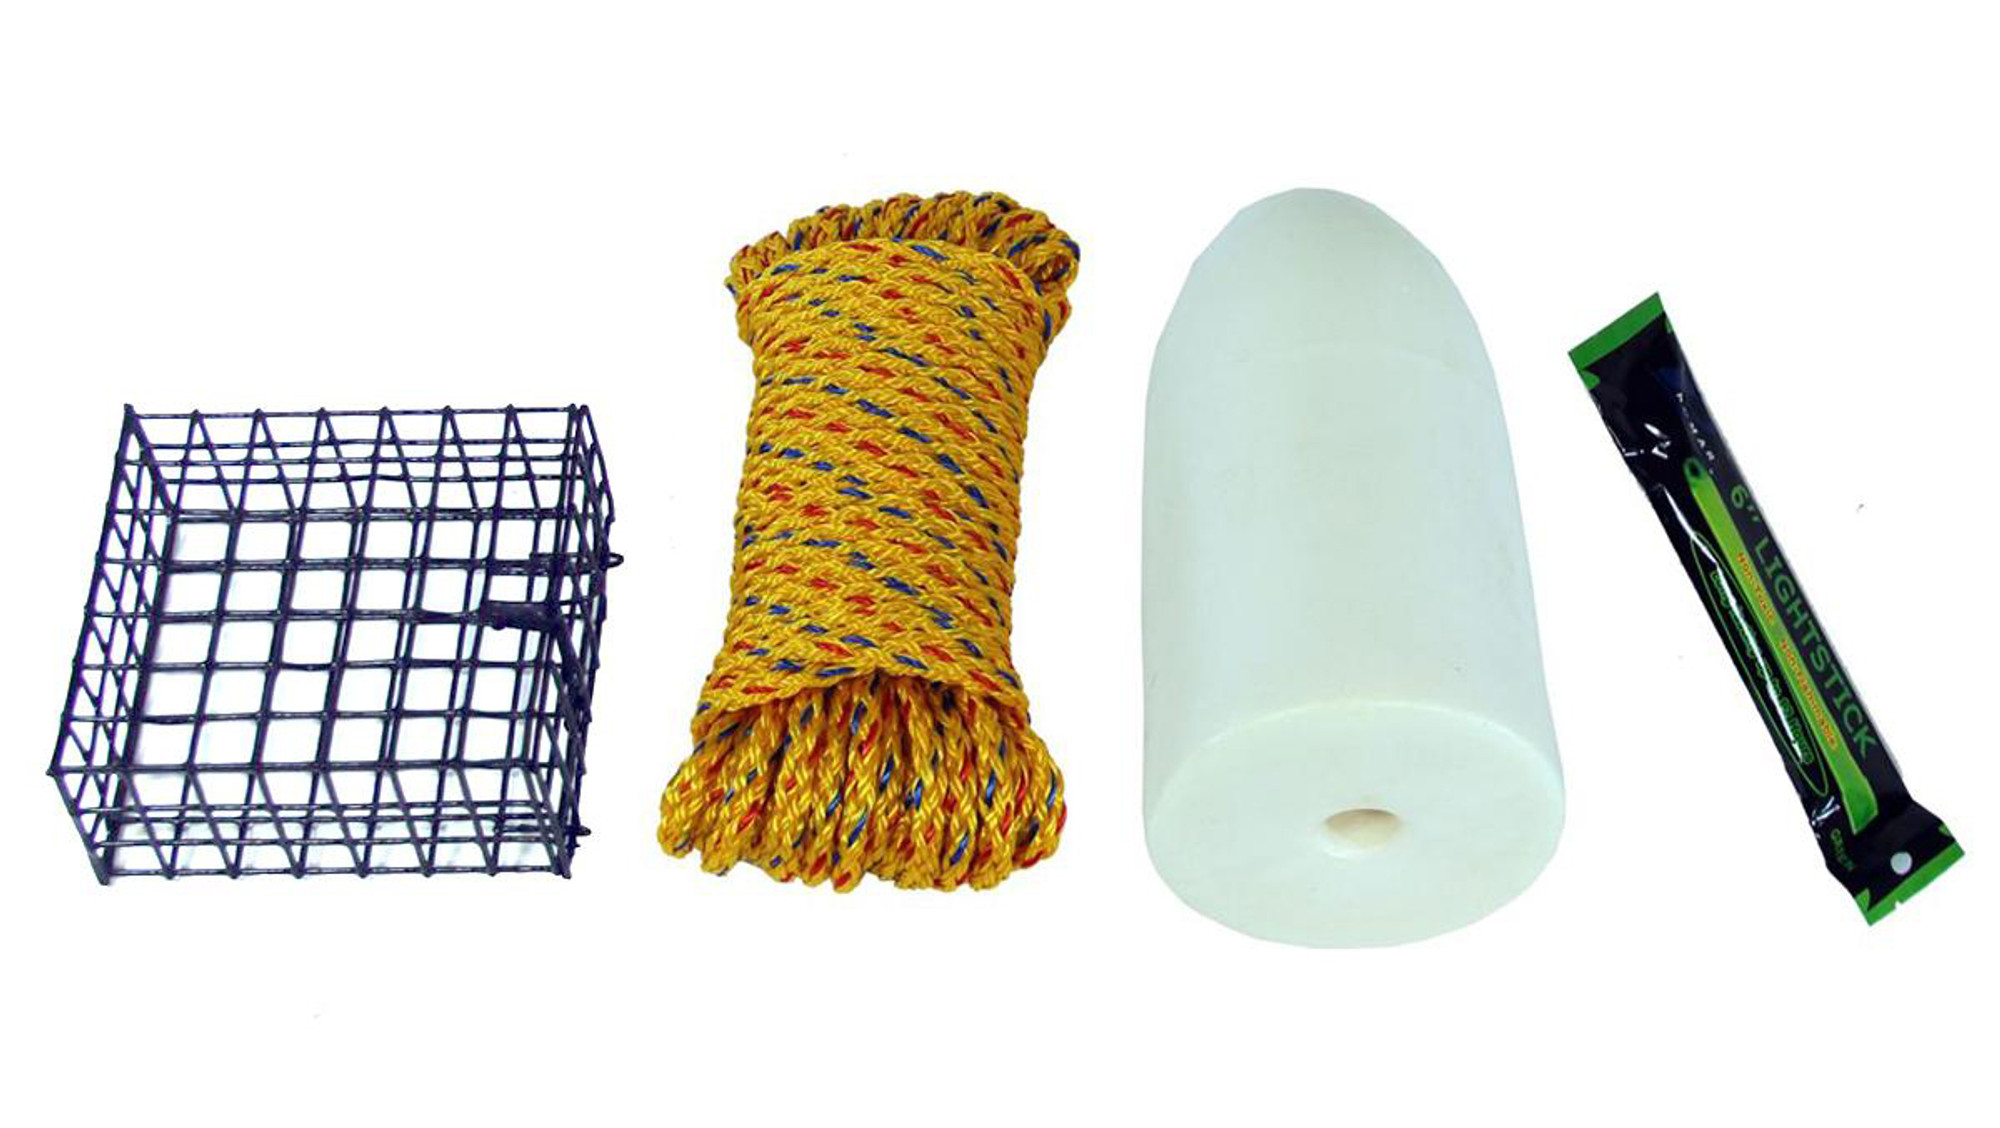 Promar Lobster/Crab Pro Rigging Kit for Hoop Nets / Traps